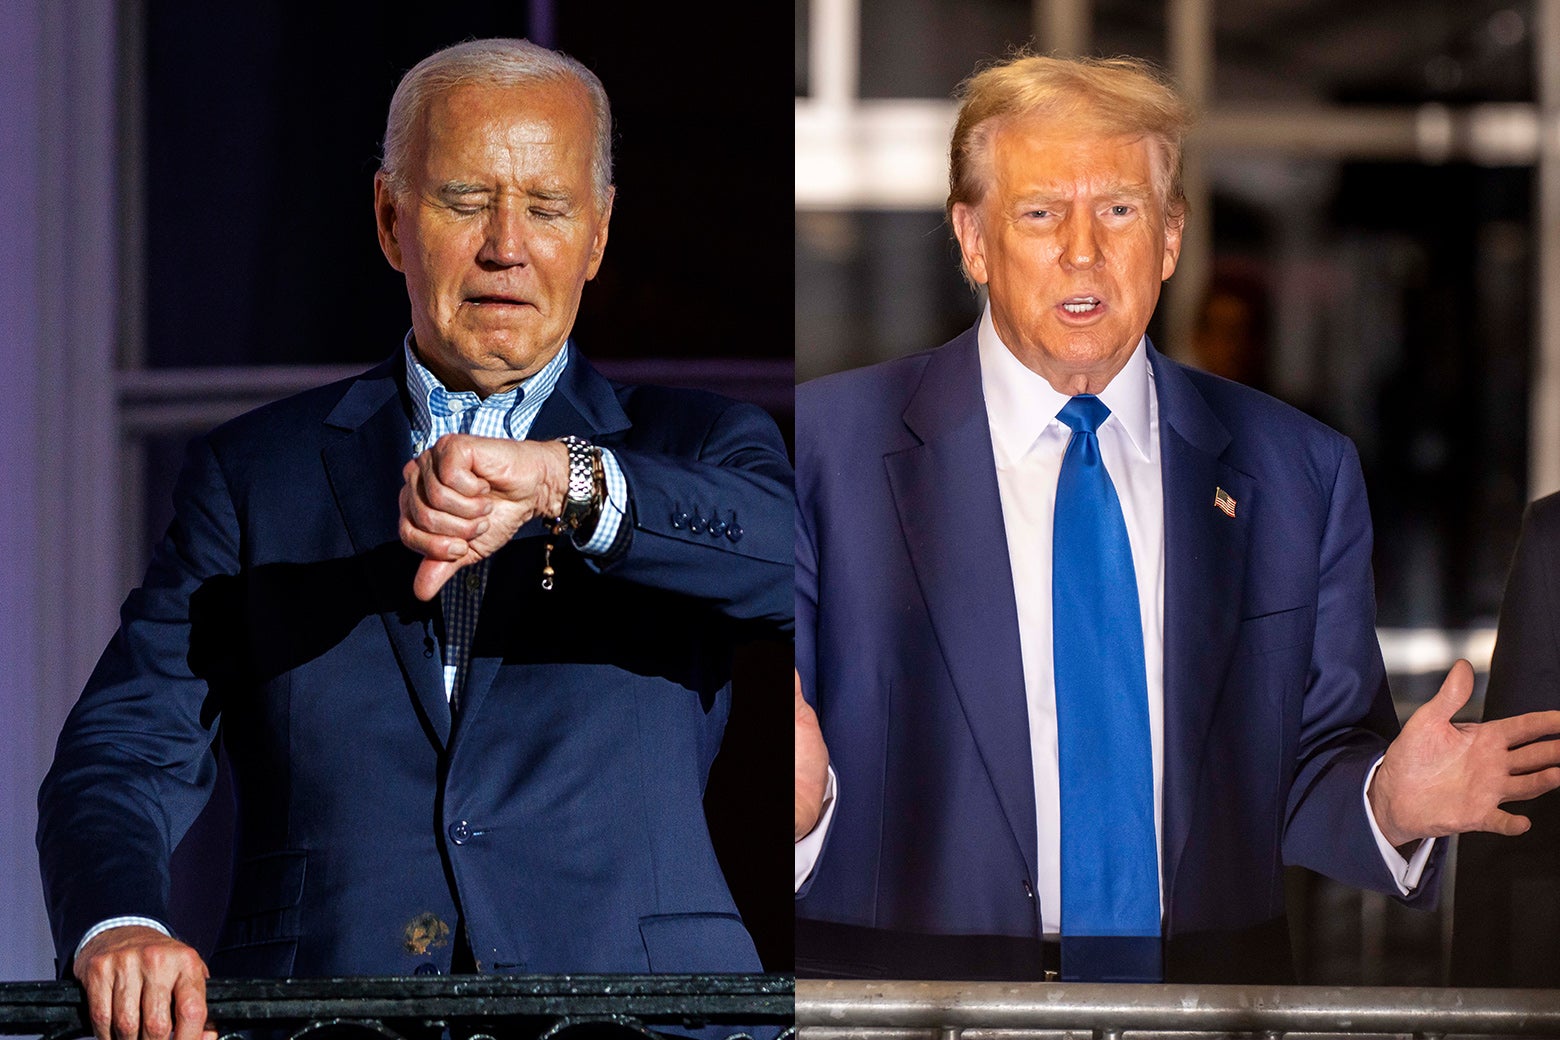 Biden Is Now Campaigning Like the Guy He’s Trying to Beat